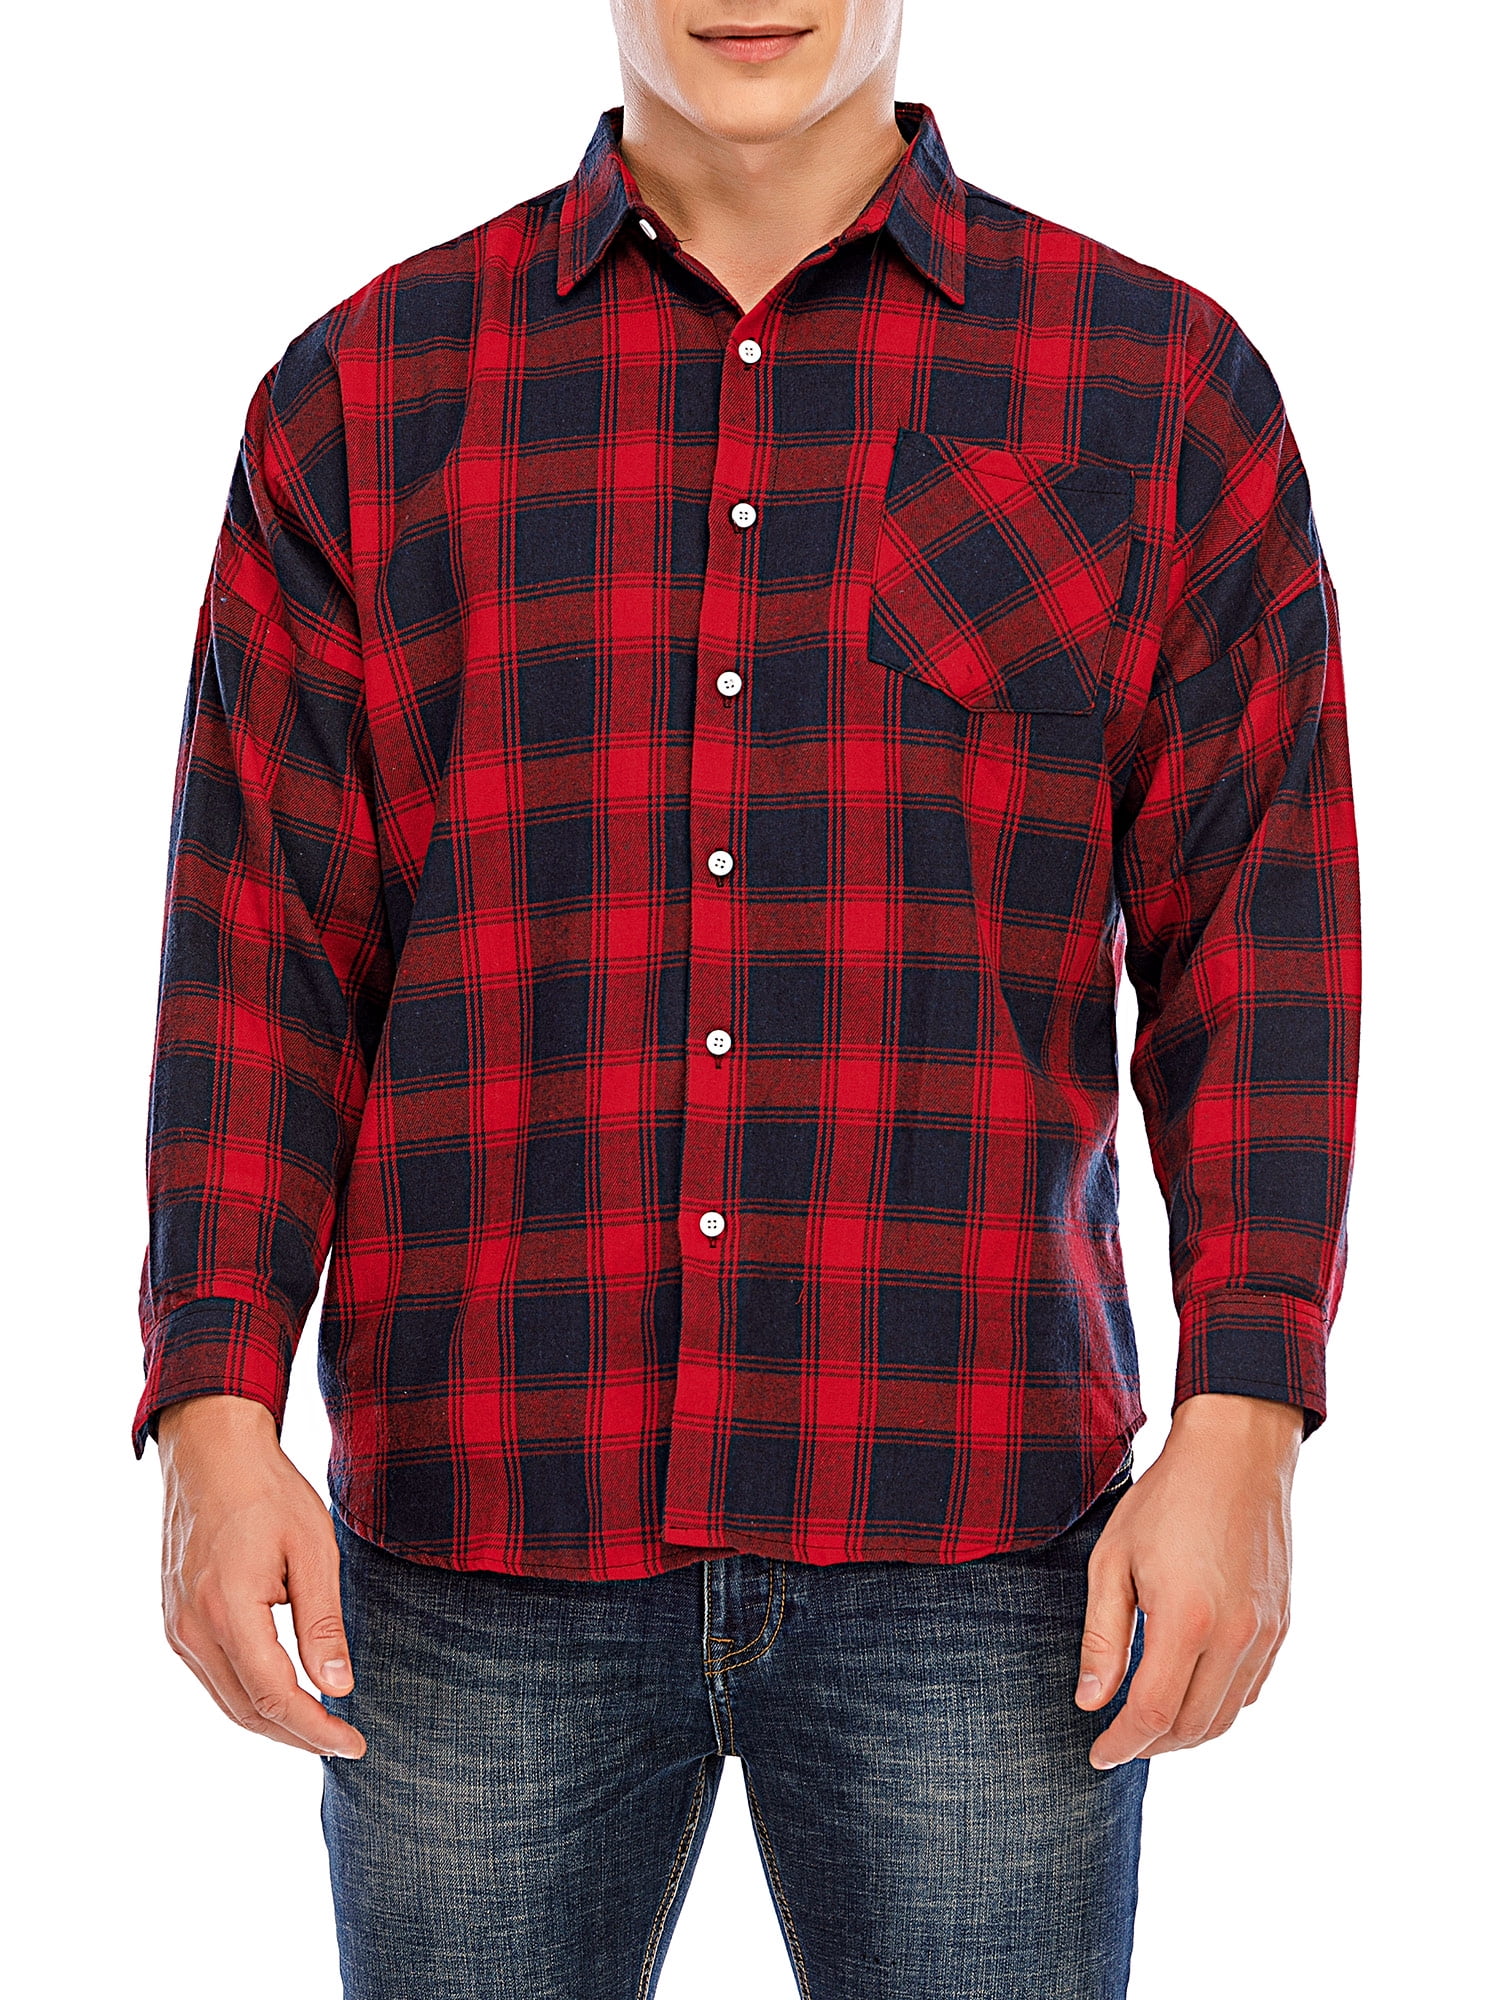 FOCUSSEXY Men's Flannel Shirts Big & Tall Long-Sleeve Button Down Plaid ...